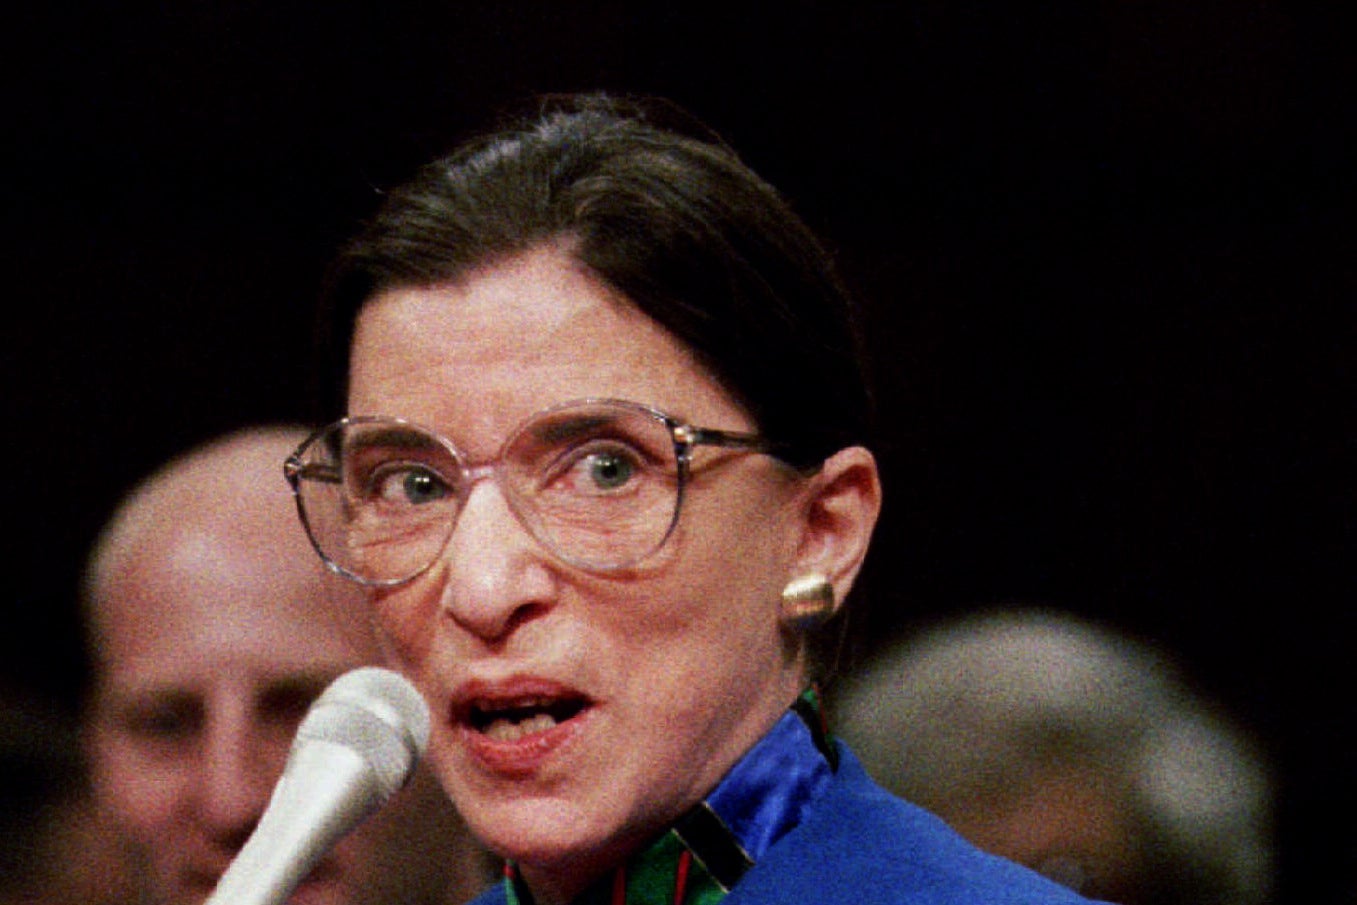 Ruth Bader Ginsburg behind a microphone in big glasses and a blue jacket.